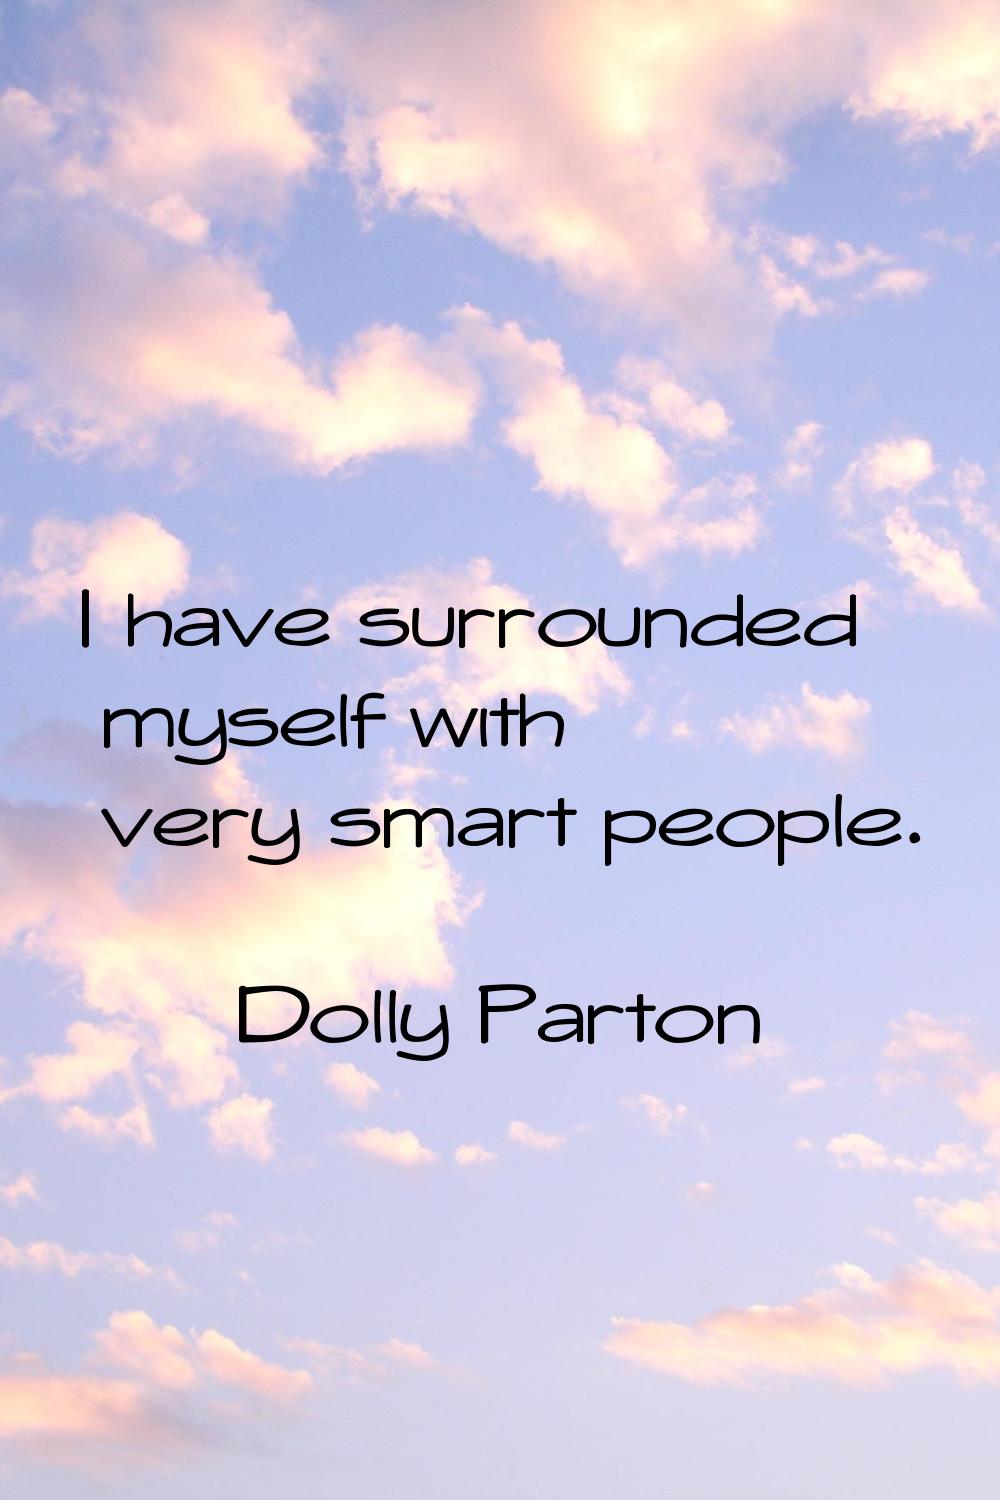 I have surrounded myself with very smart people.